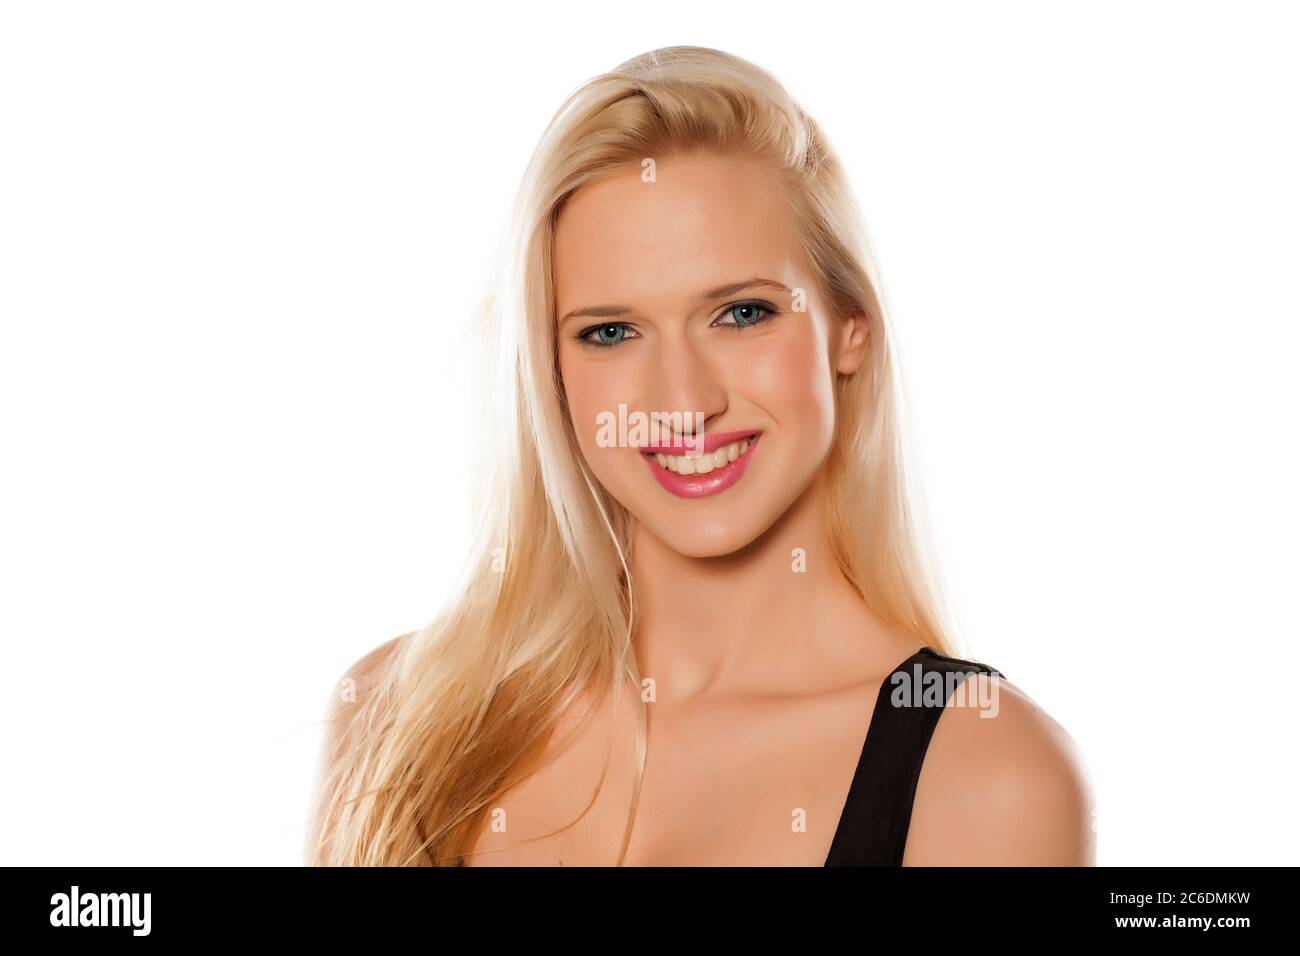 Young smiling blonde with contact lenses Stock Photo